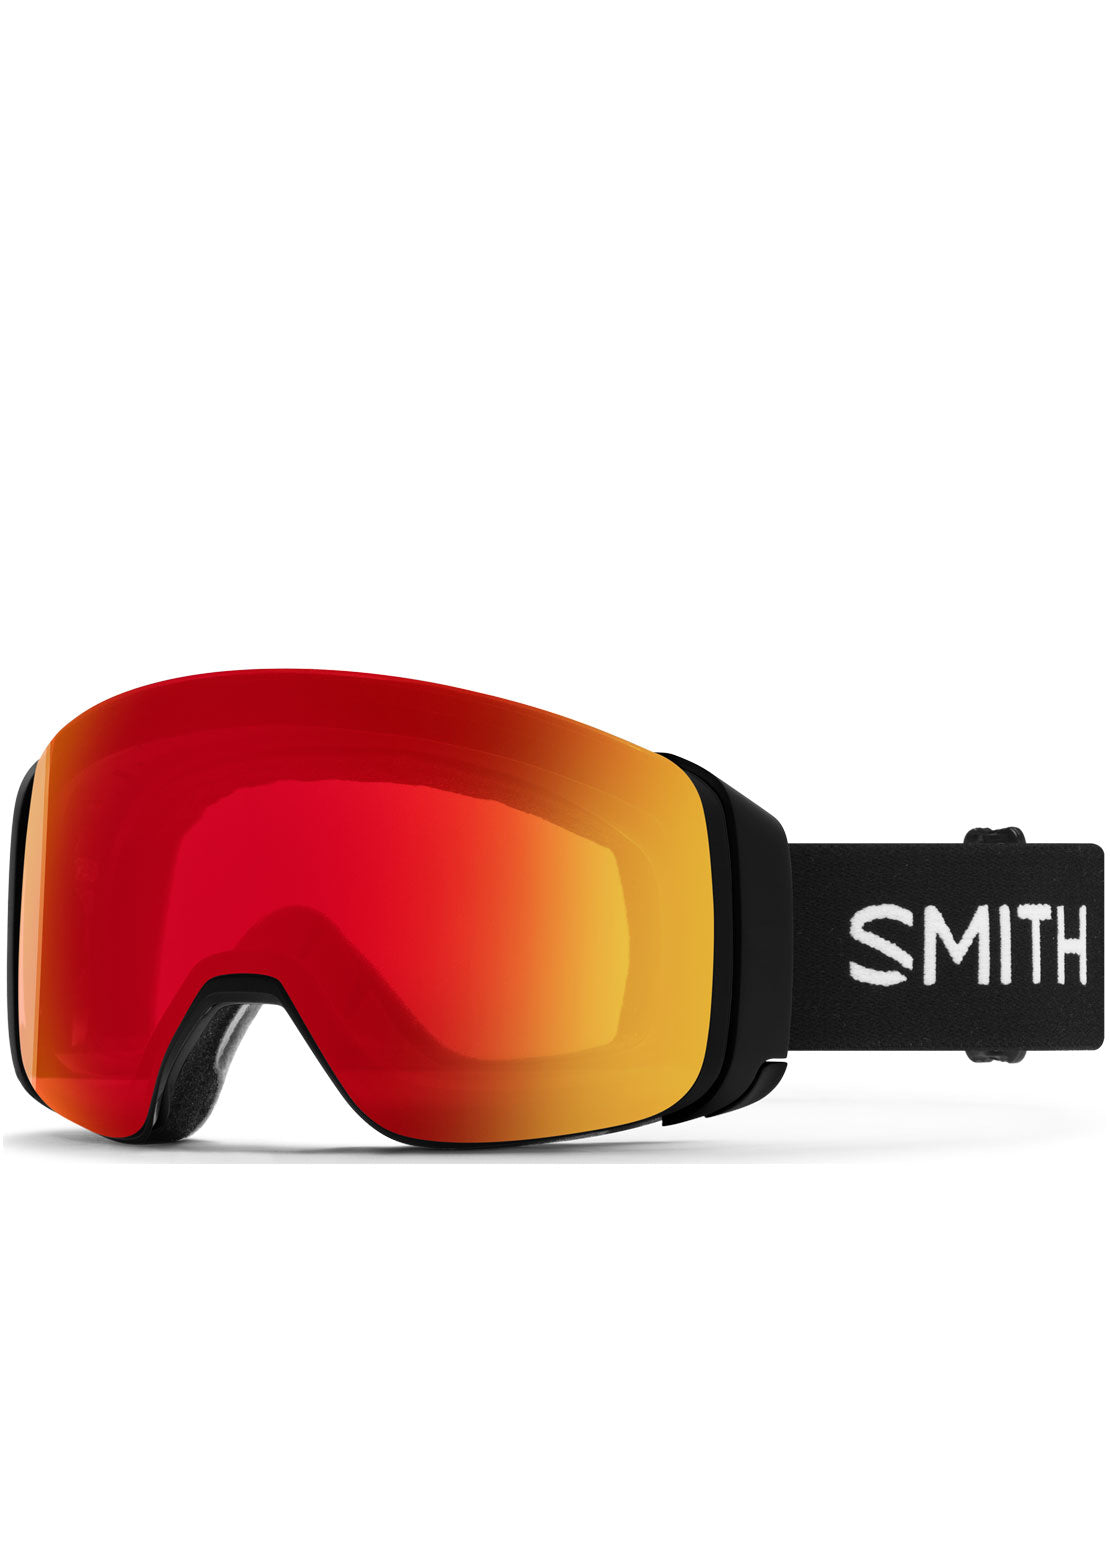 Smith 4D Mag Goggles - PRFO Sports